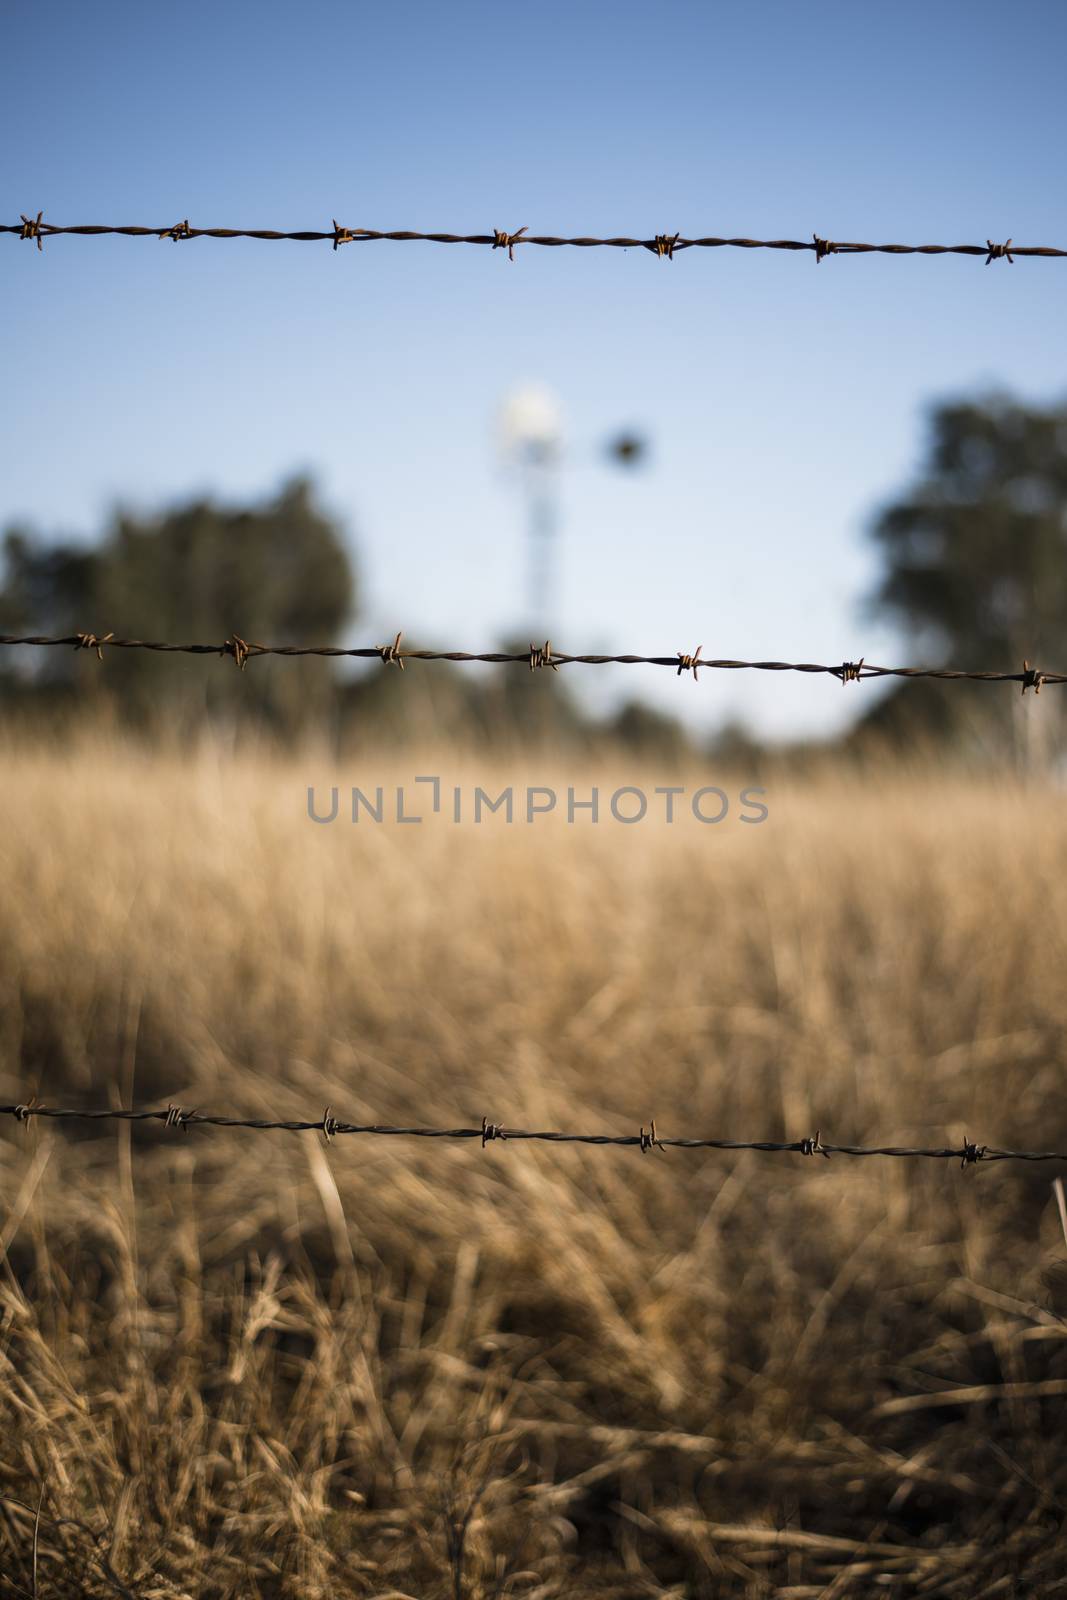 Rusted sharp timber and metal barb wire fence. by artistrobd